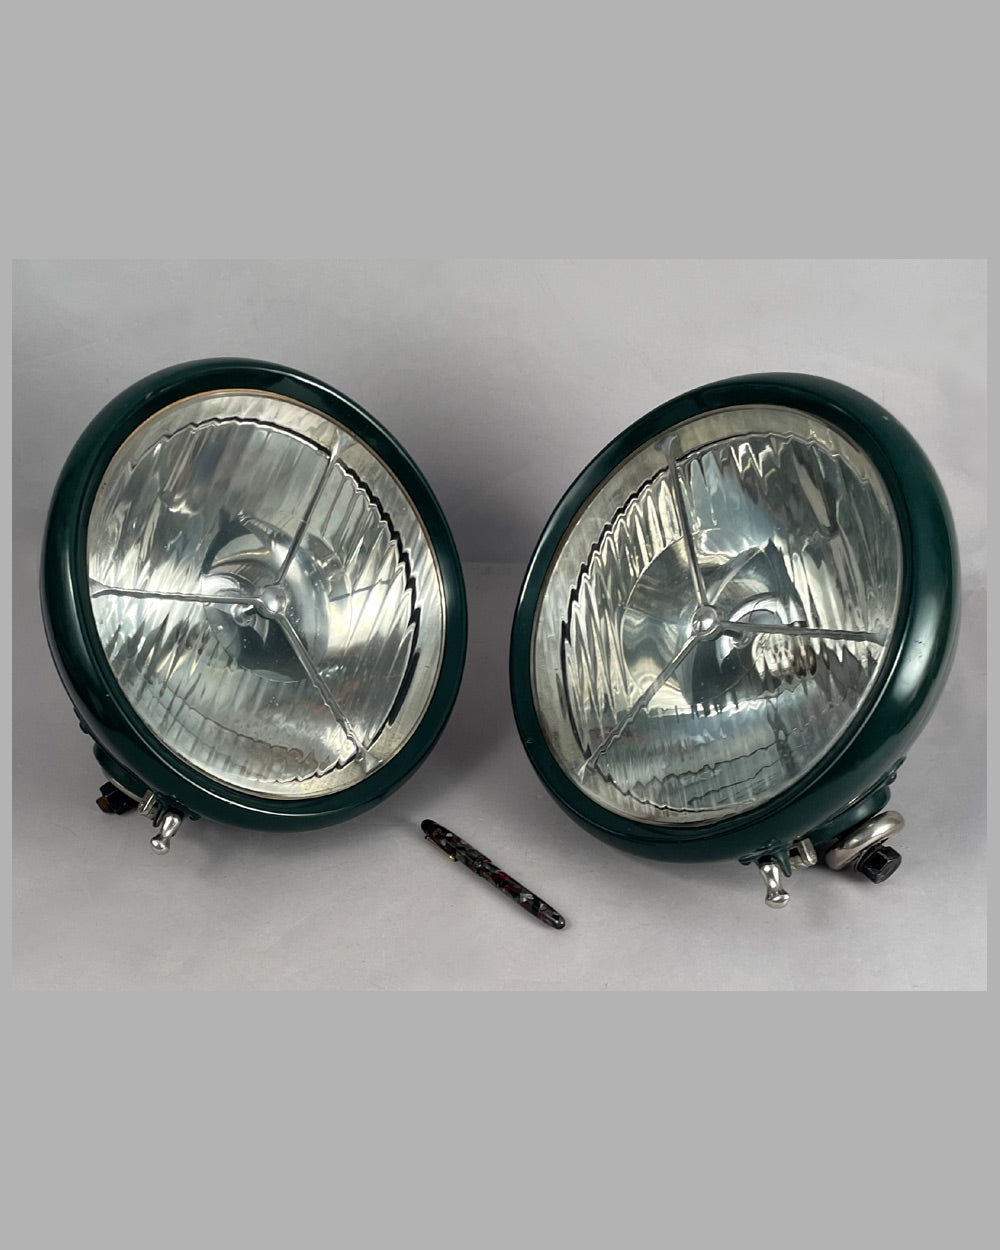 Pair of large Lucas period headlamps, 1930’s to 1950’s